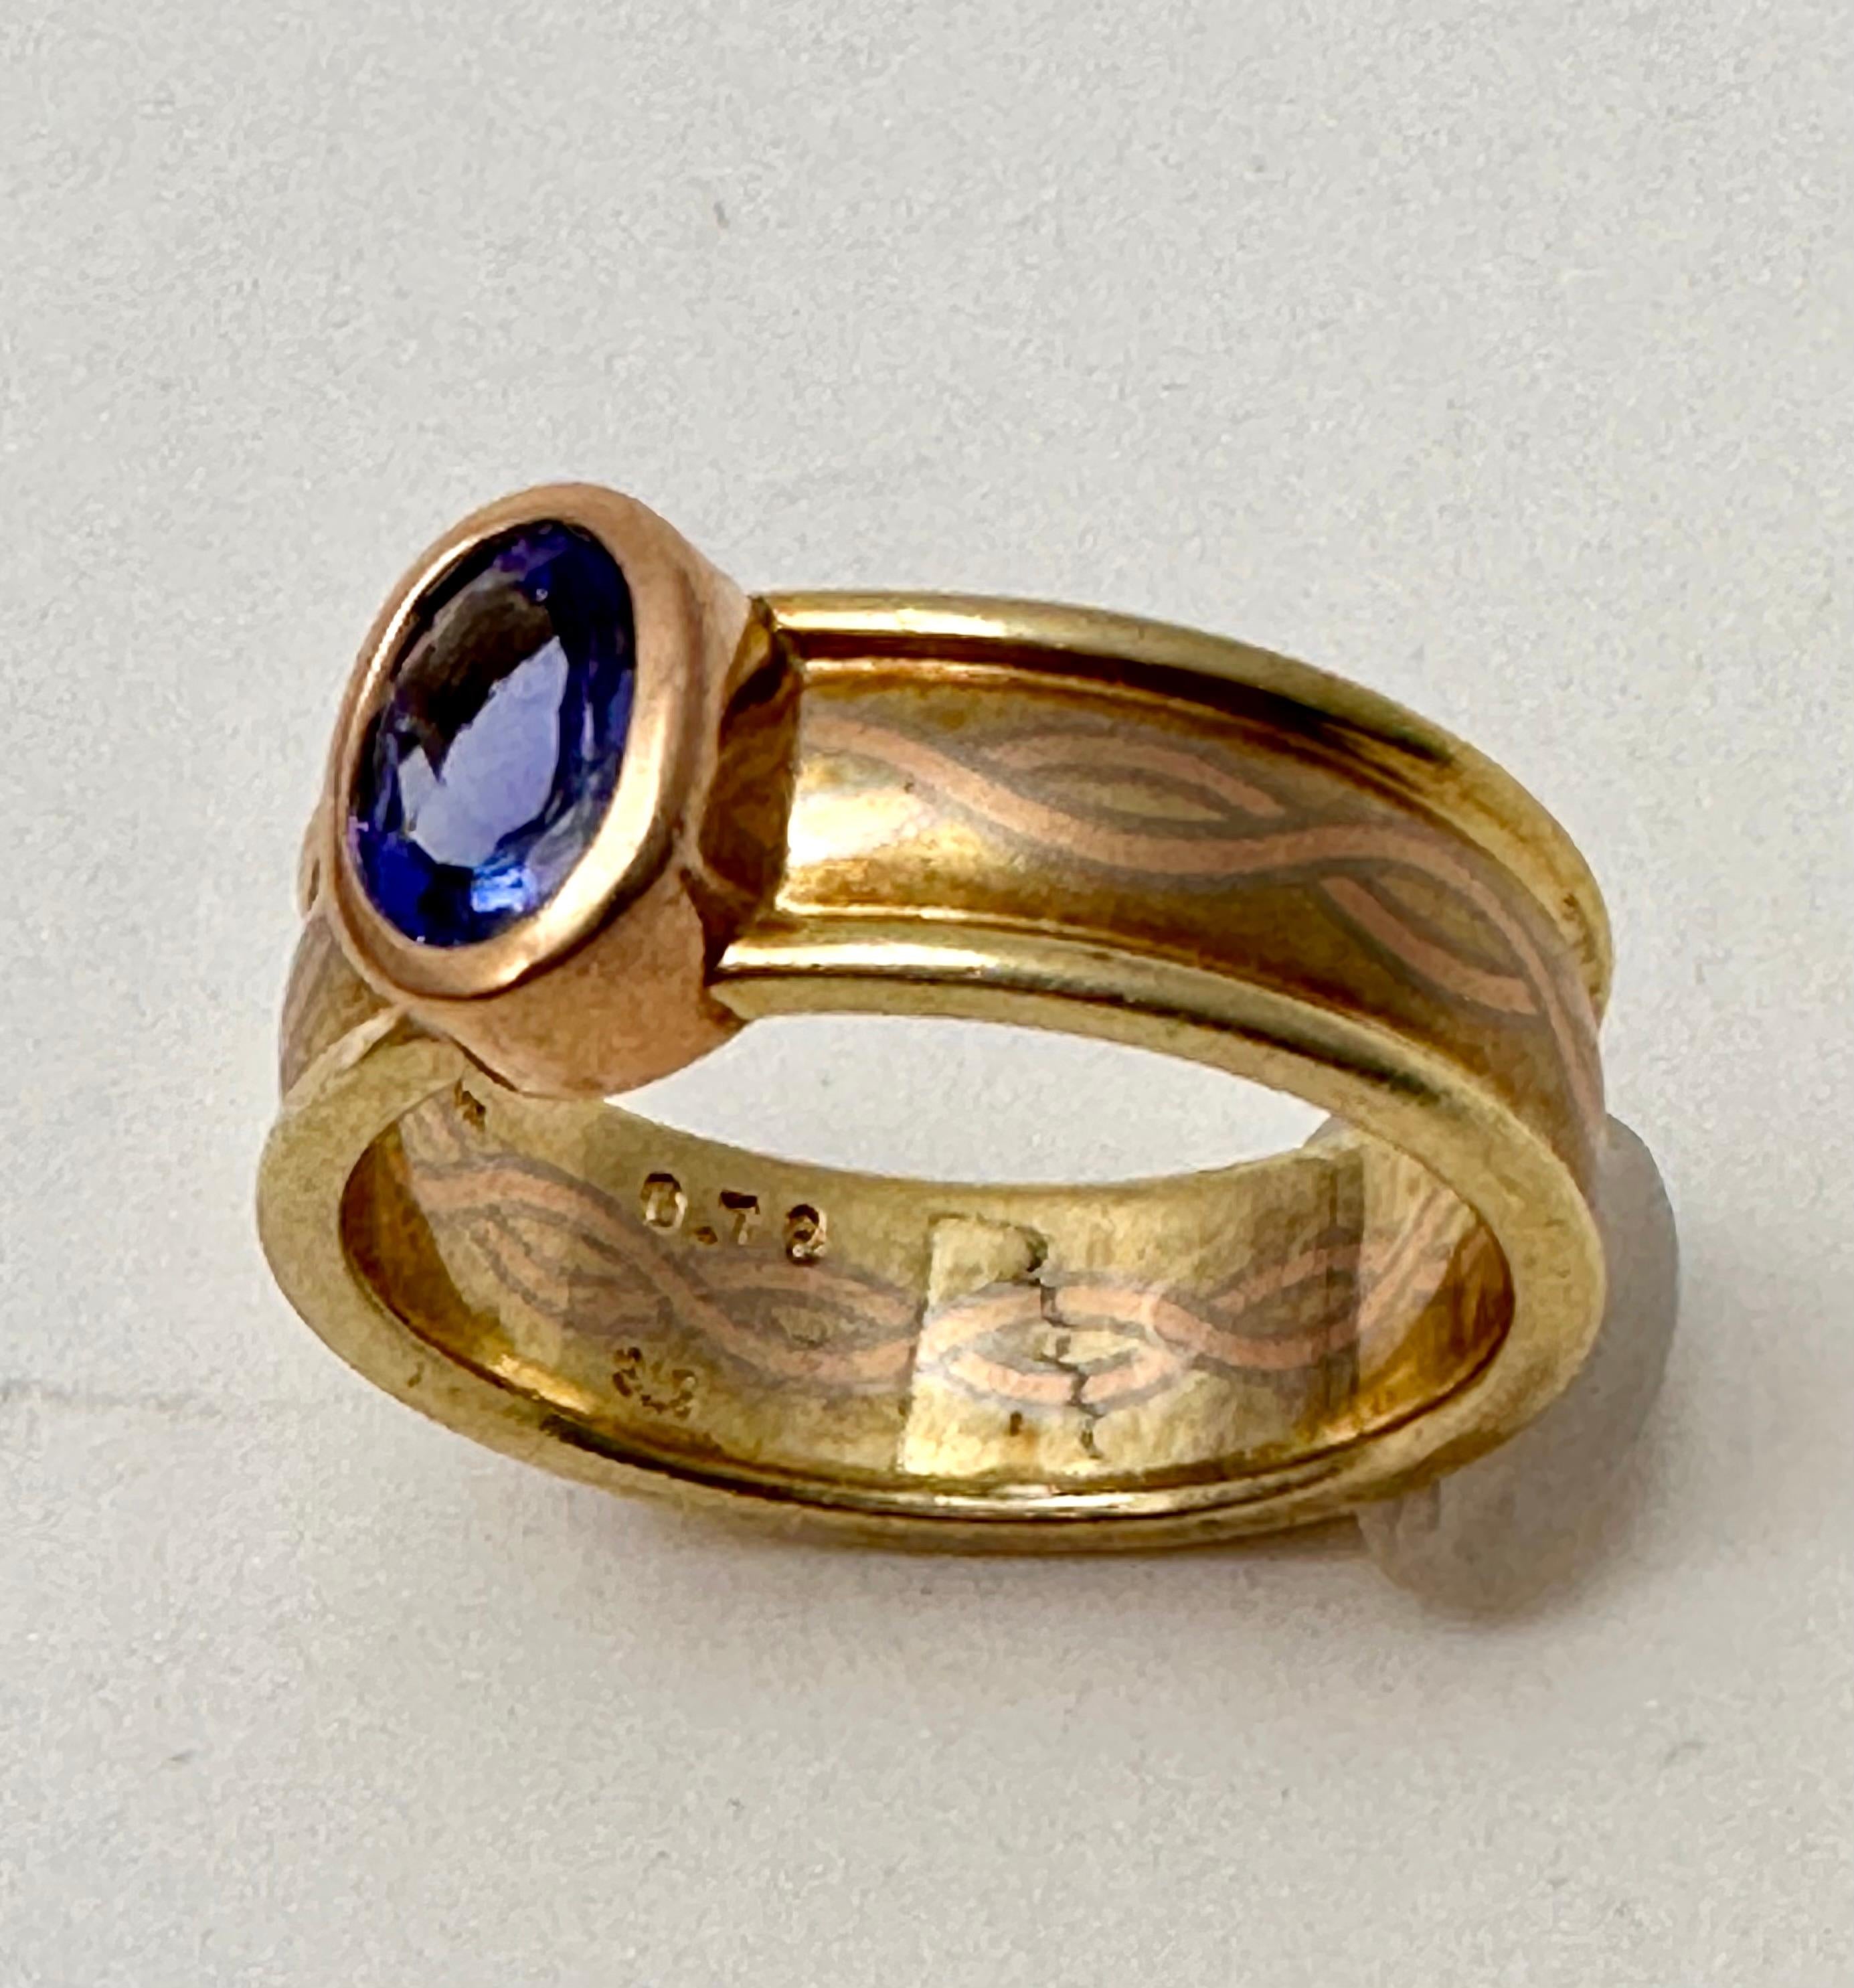 14k Yellow Gold 4.5mm x 6.5 Oval Cut Tanzanite Ring Size 7 For Sale 4